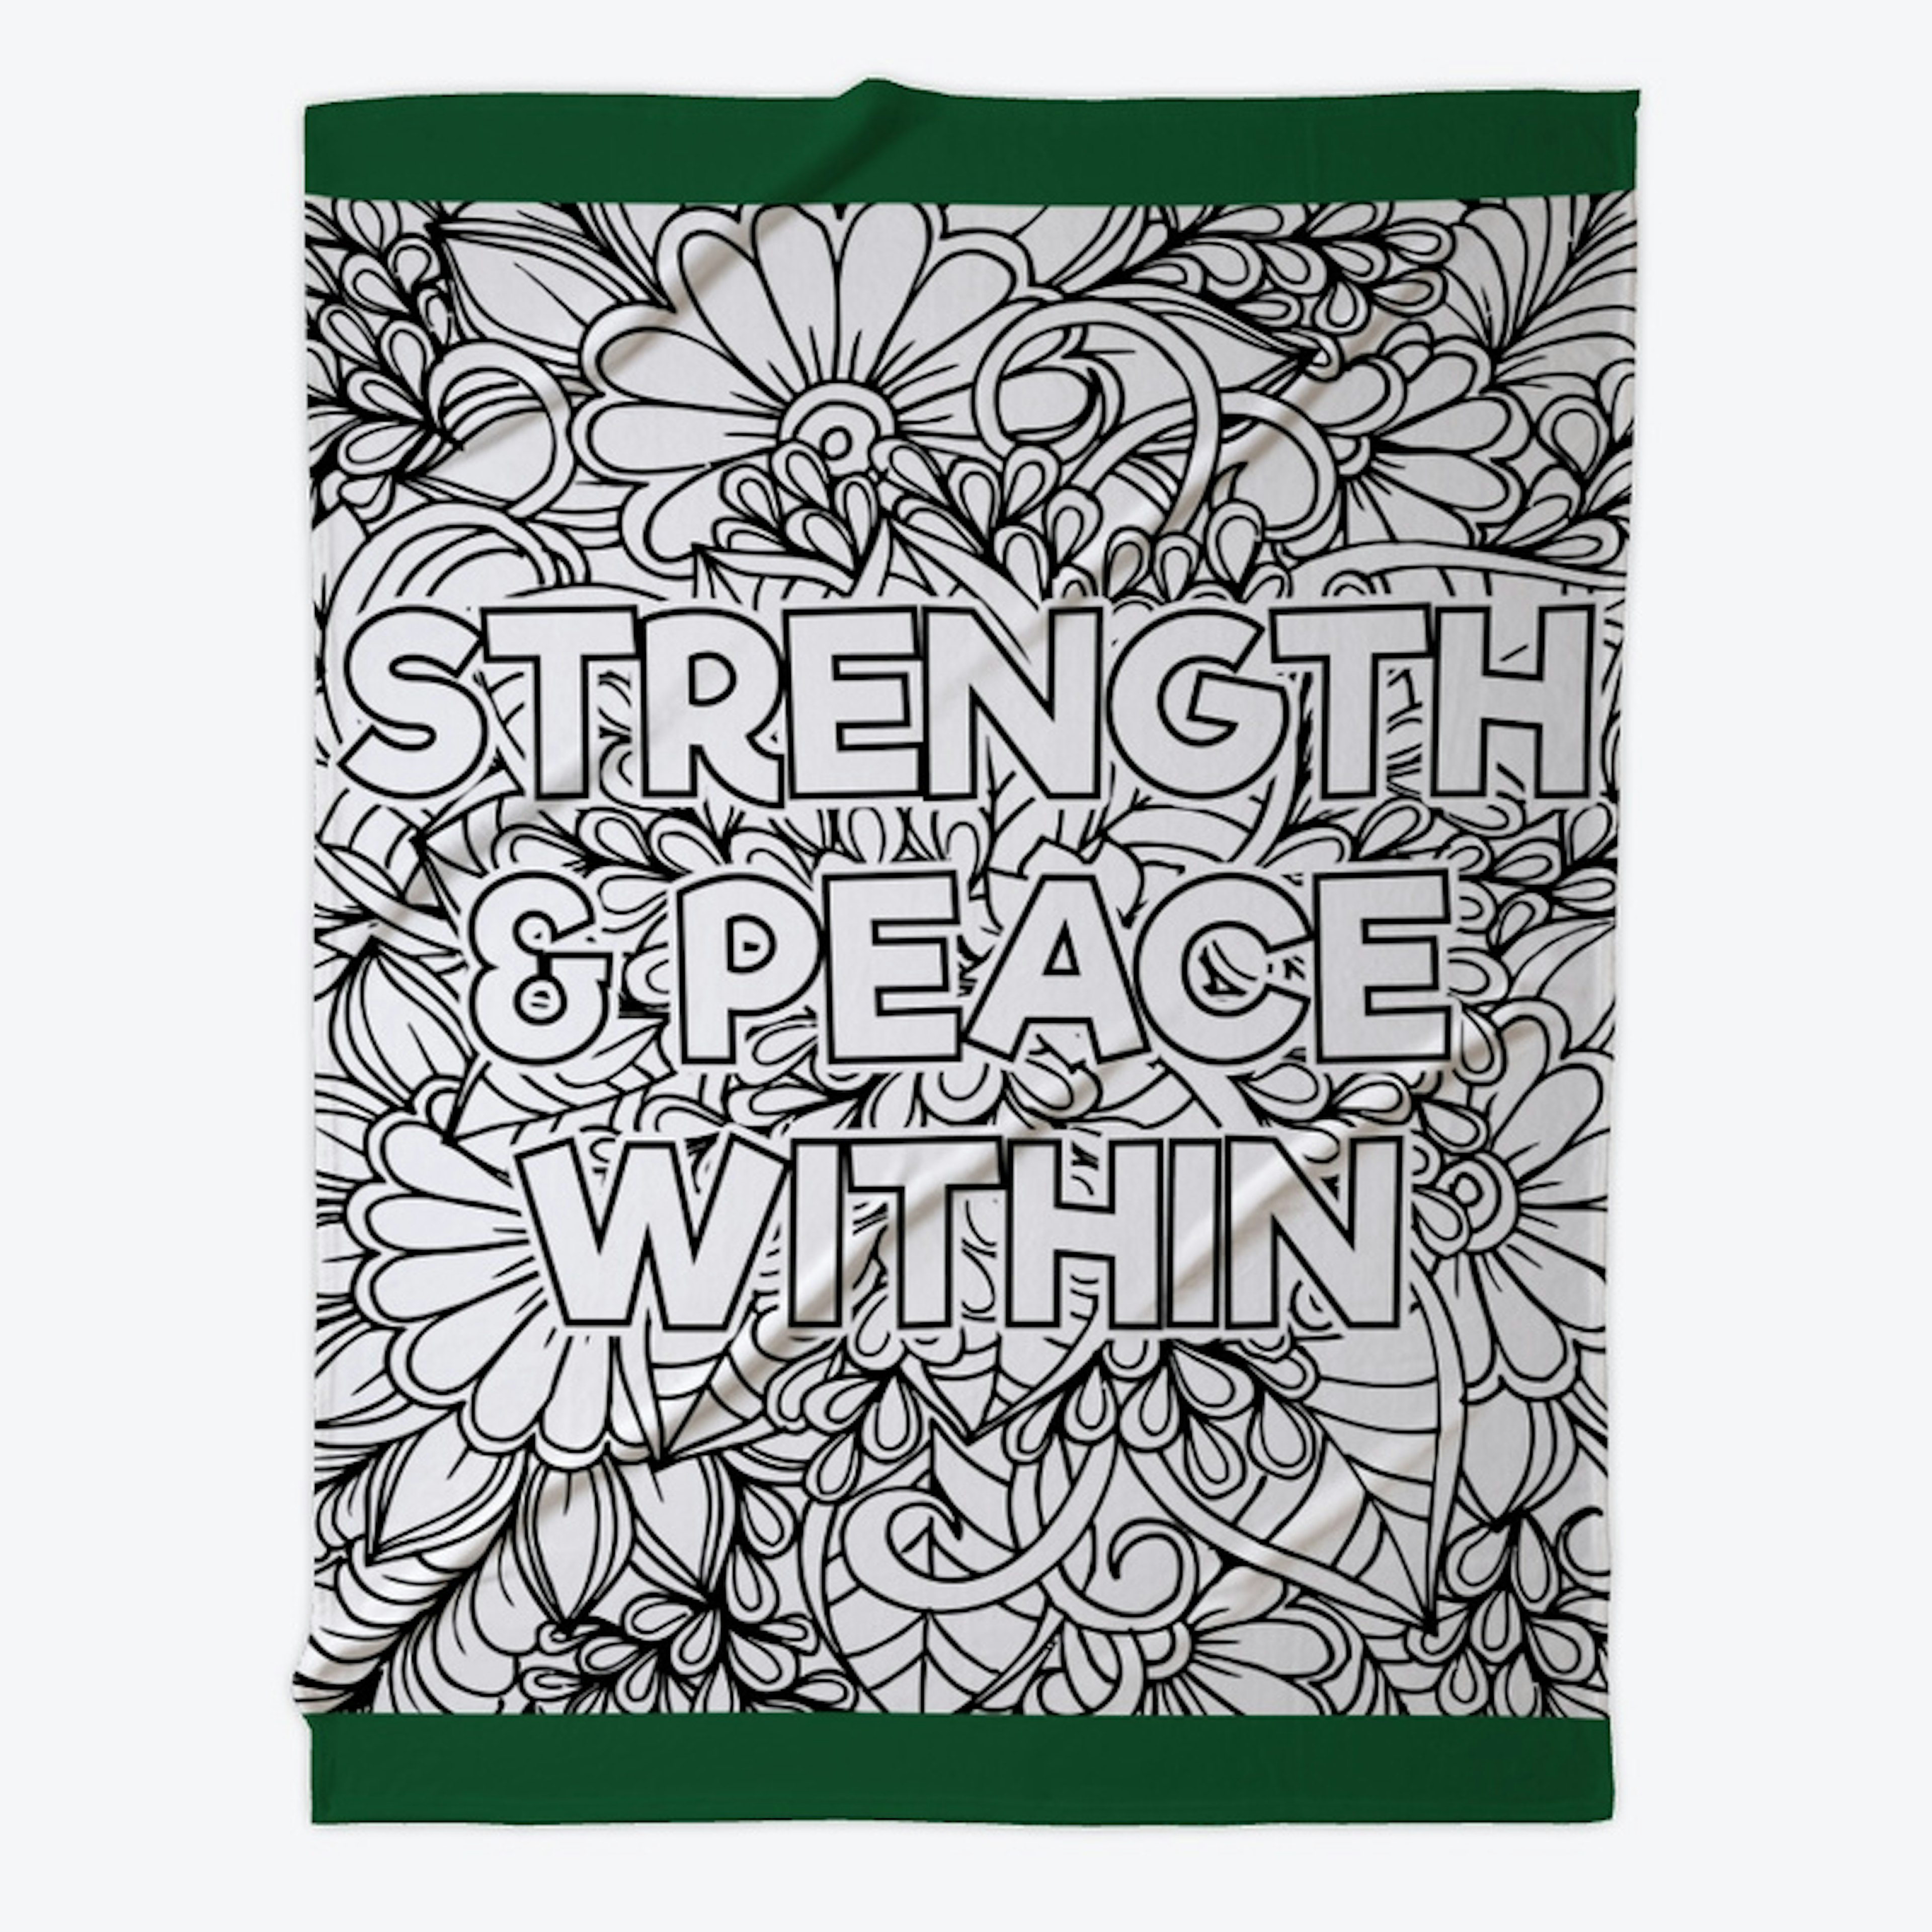 Strength & Peach Within 